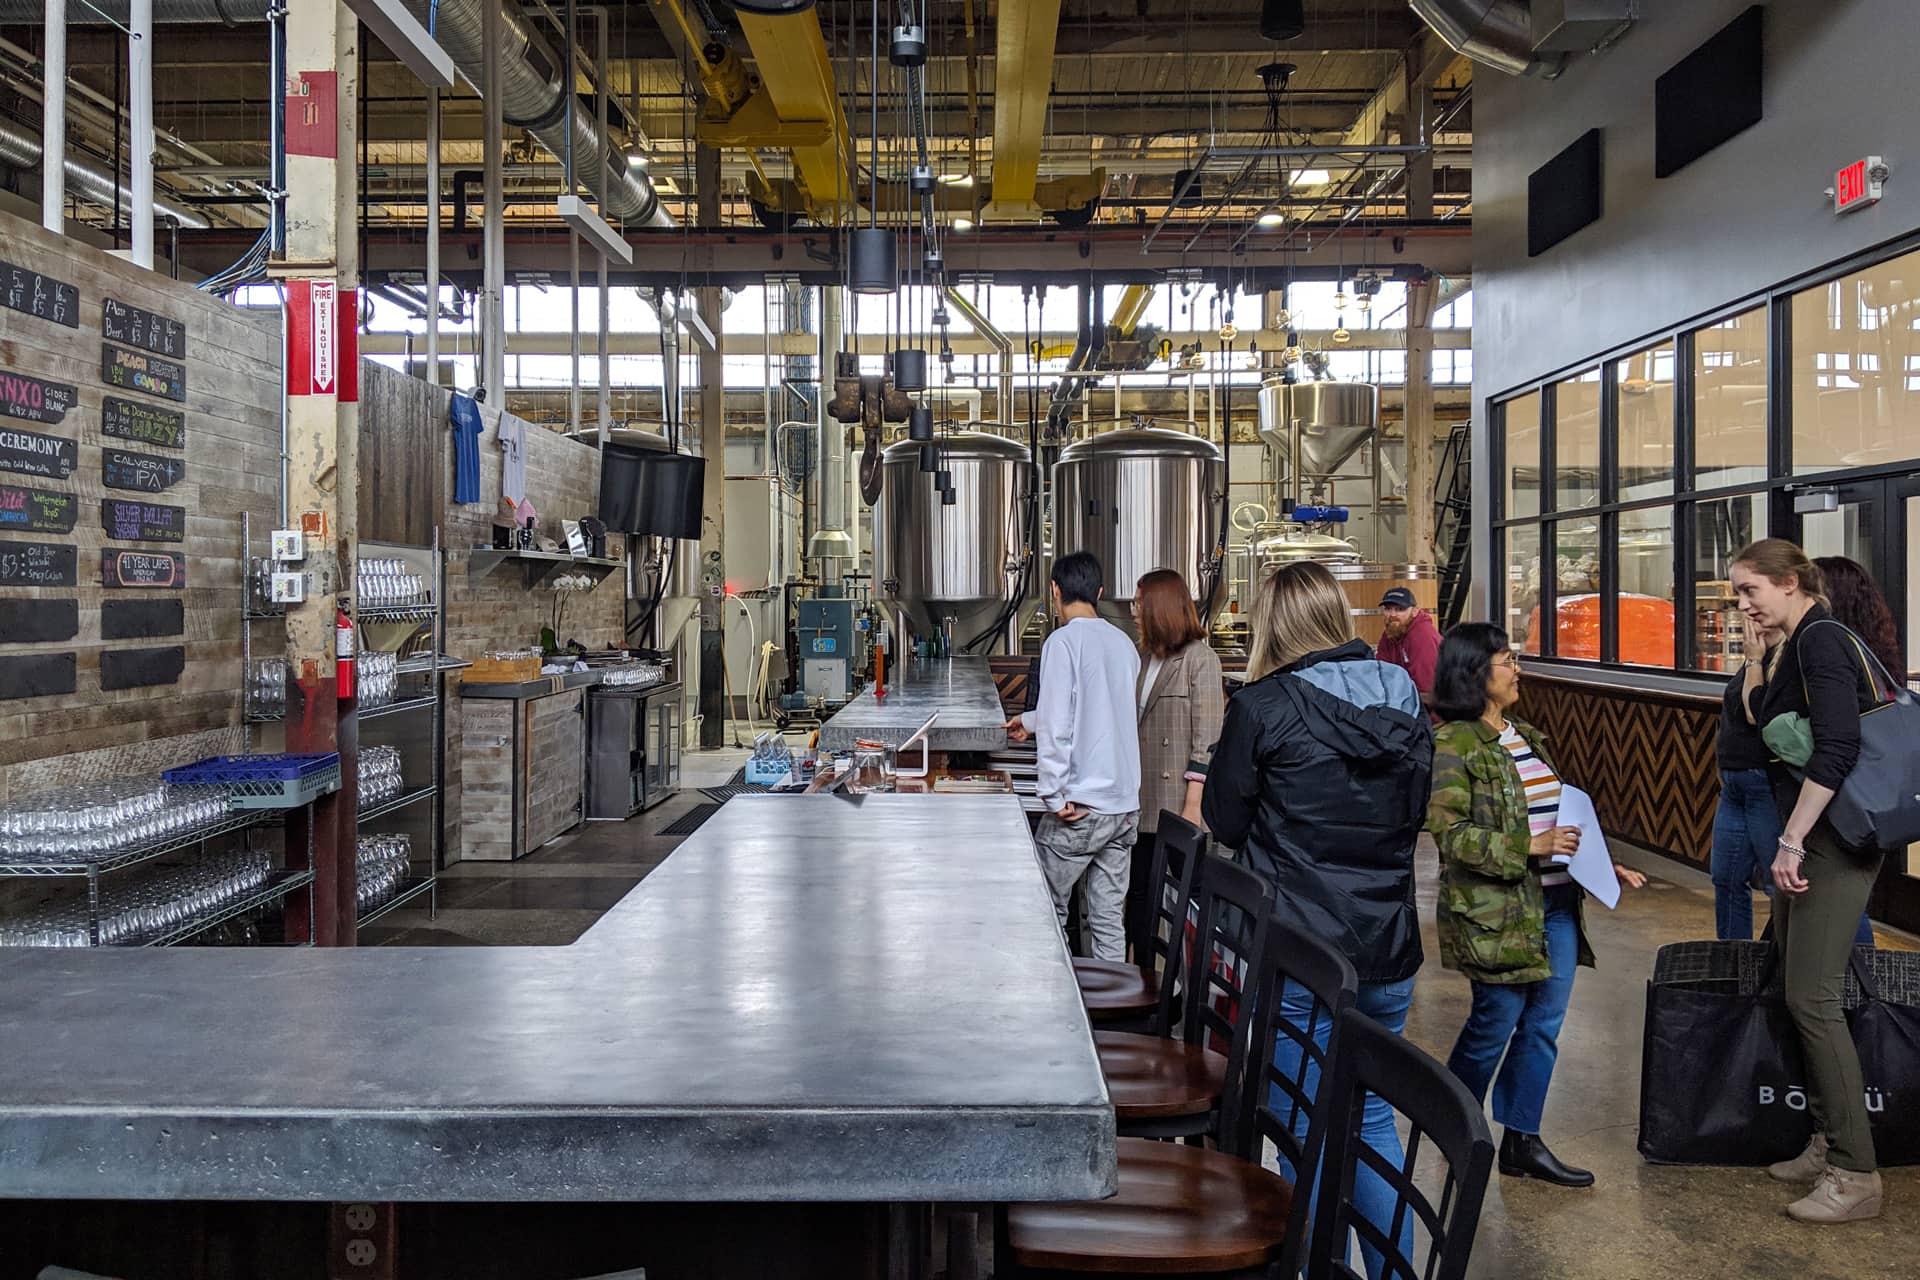 Featured image for “MOBTOWN BREWERY”